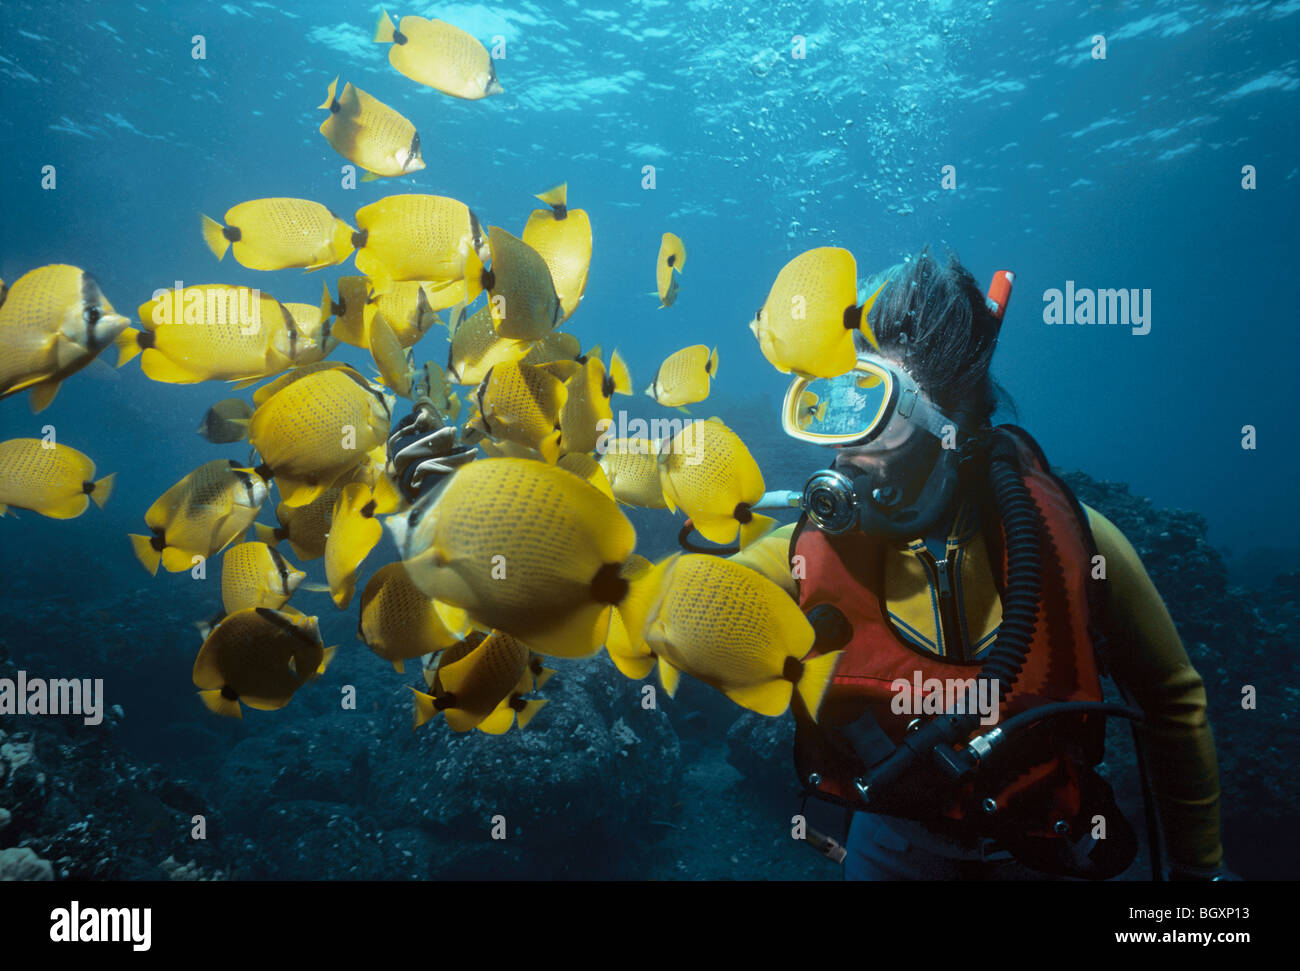 Diver surrounded by Lemon Butterflyfish (Chaetodon millaris). Stock Photo